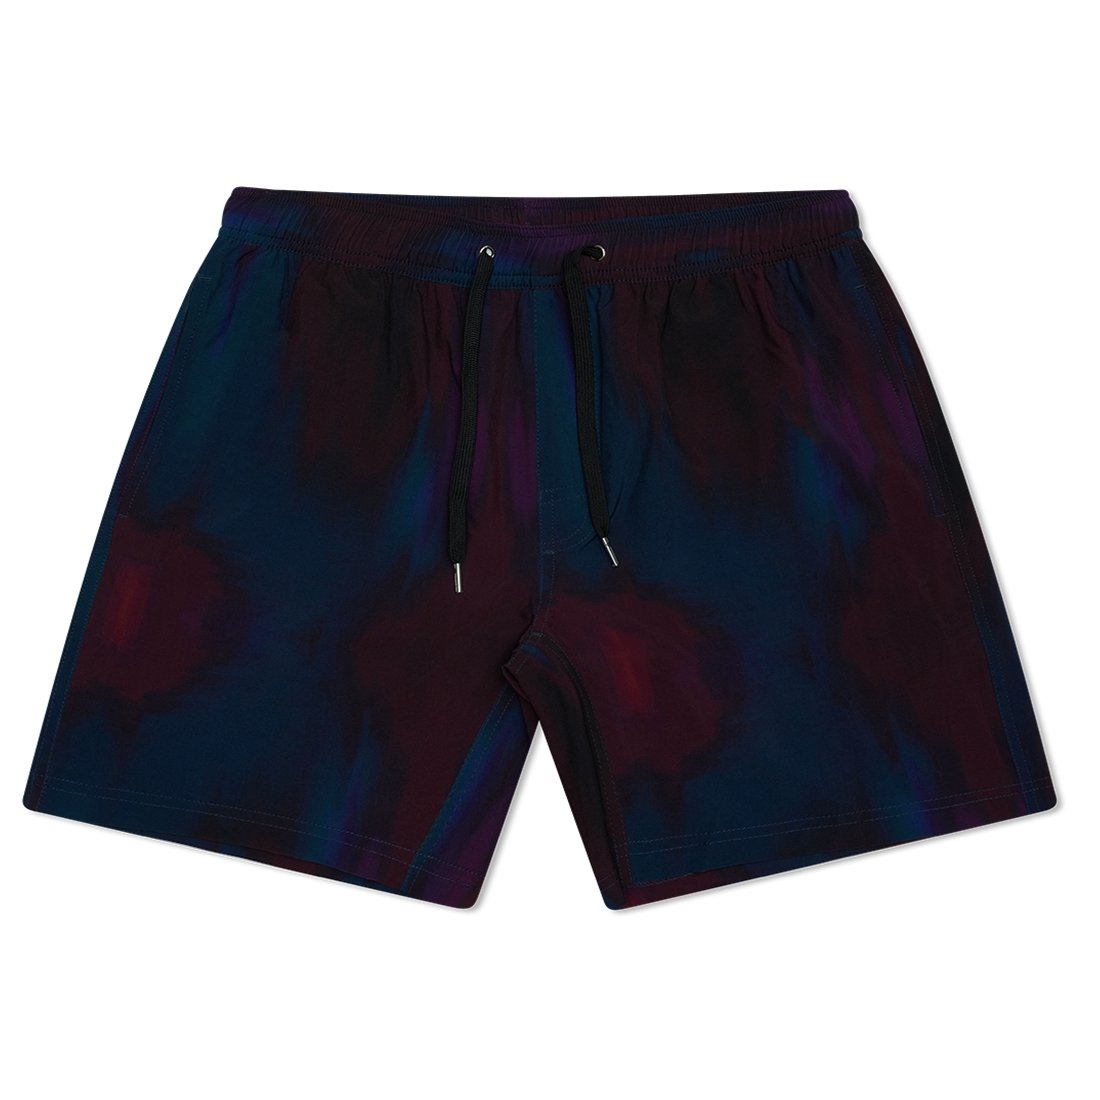 Bounce Back 5” - Blue and Purple Tie Dye Shorts - Bamboo Ave. - Men's Shorts